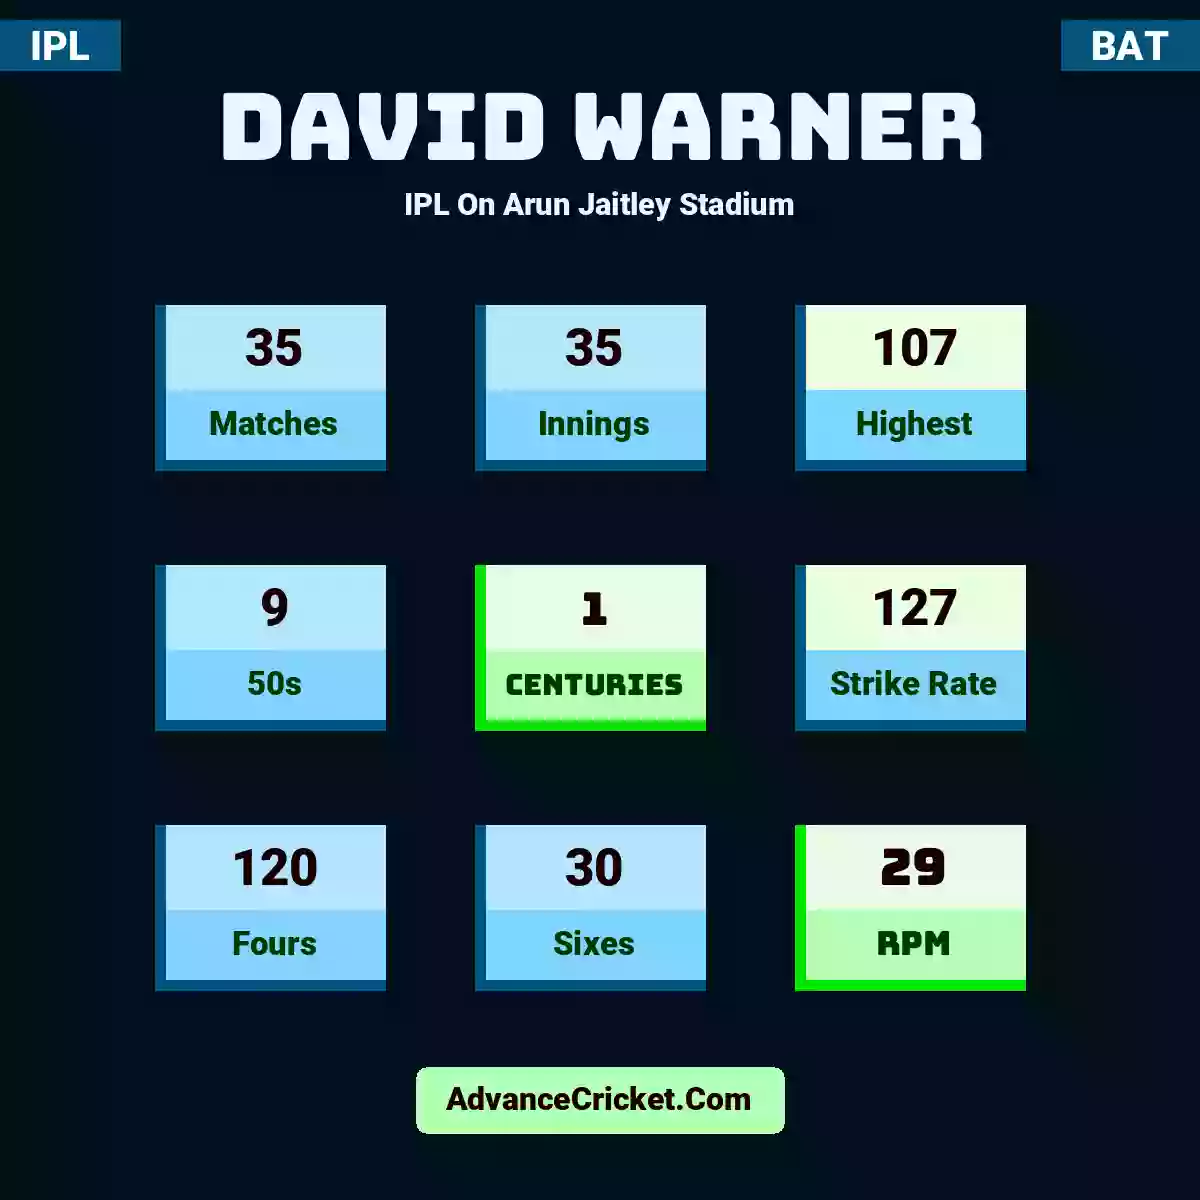 David Warner IPL  On Arun Jaitley Stadium, David Warner played 35 matches, scored 107 runs as highest, 9 half-centuries, and 1 centuries, with a strike rate of 127. D.Warner hit 120 fours and 30 sixes, with an RPM of 29.